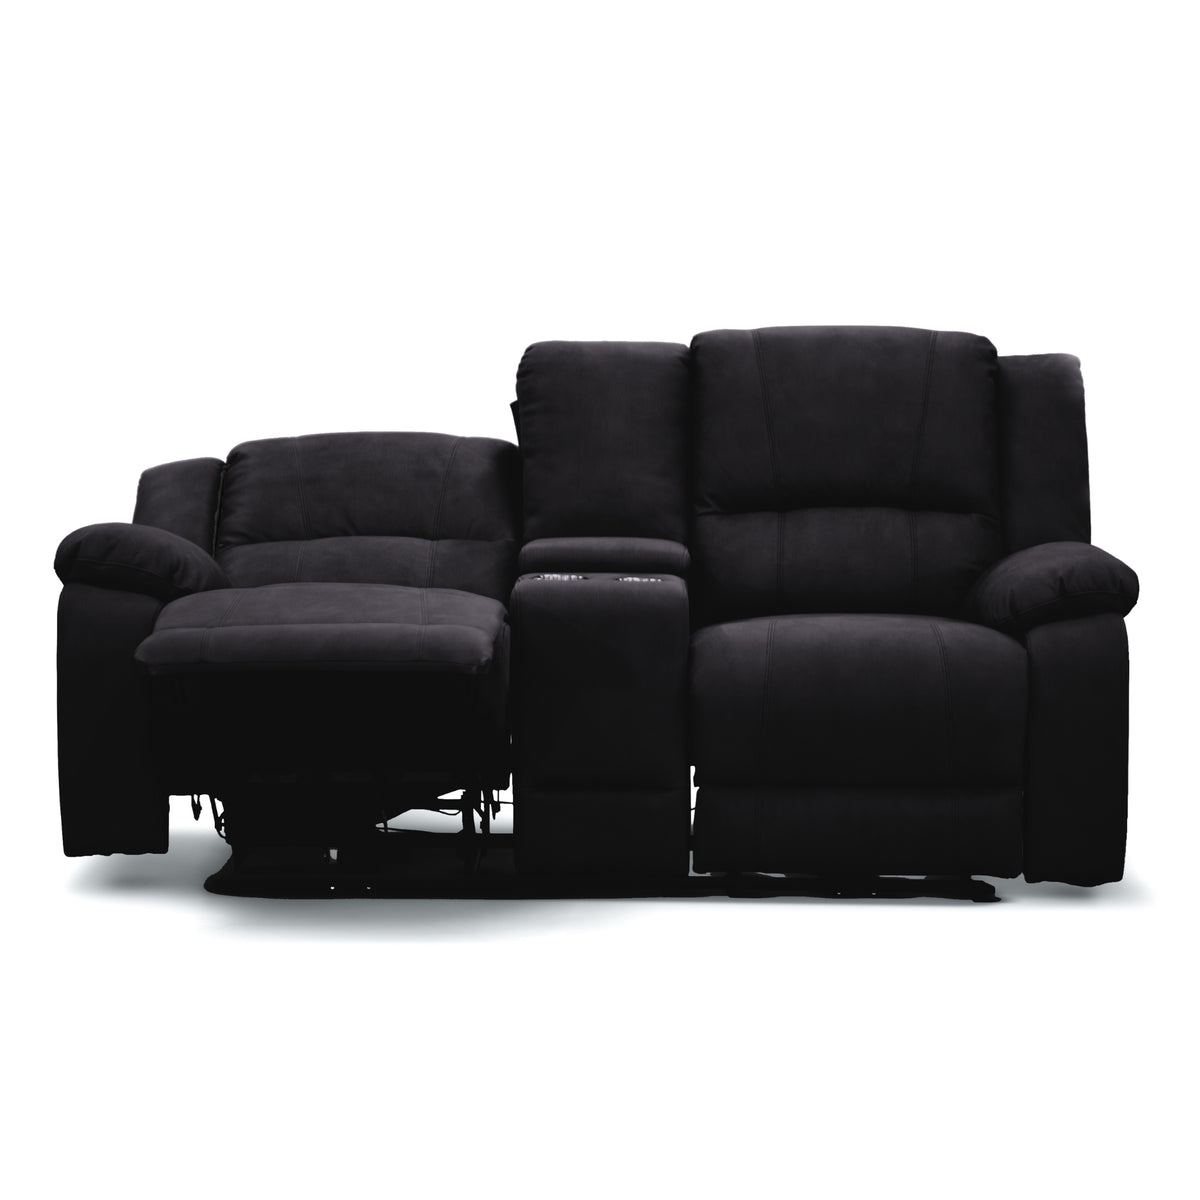 Anderson Fabric Electric Recliner Sofa Lounge Chair ONYX Black 1 + 1 + 2 Seater